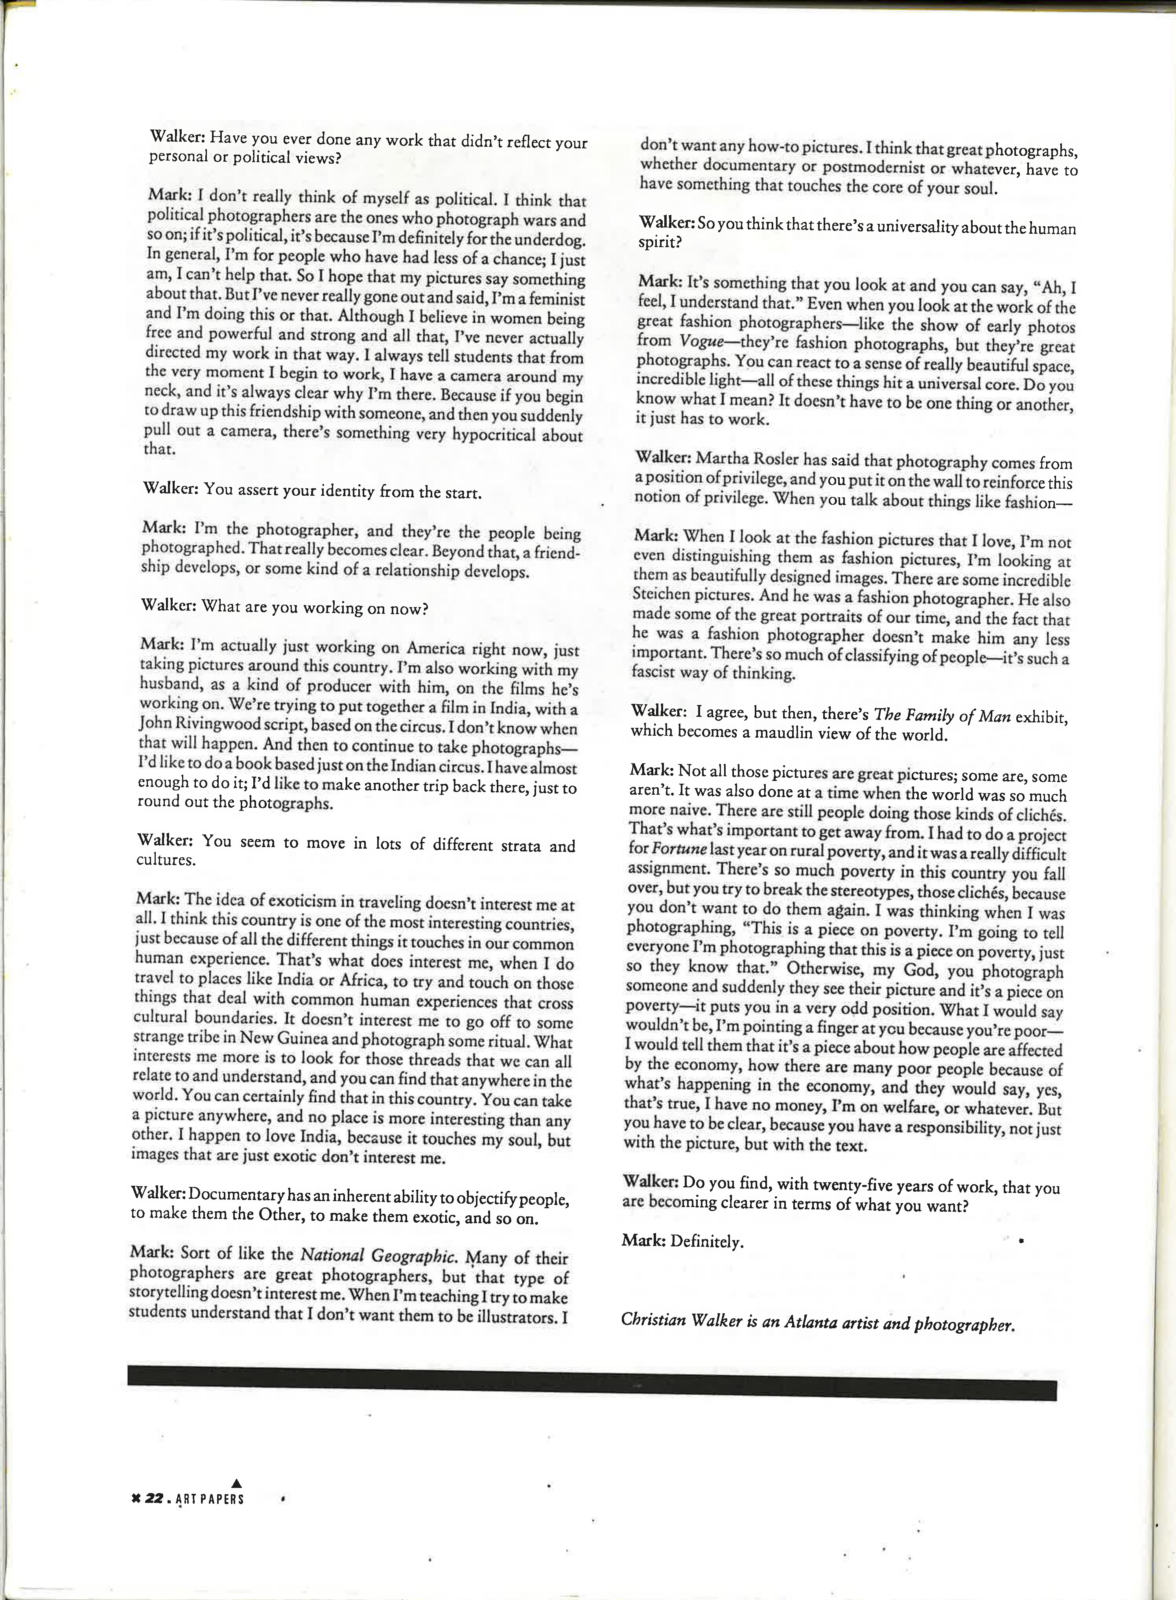 A black and white scan of the May/June 1992 edition of Art Papers.